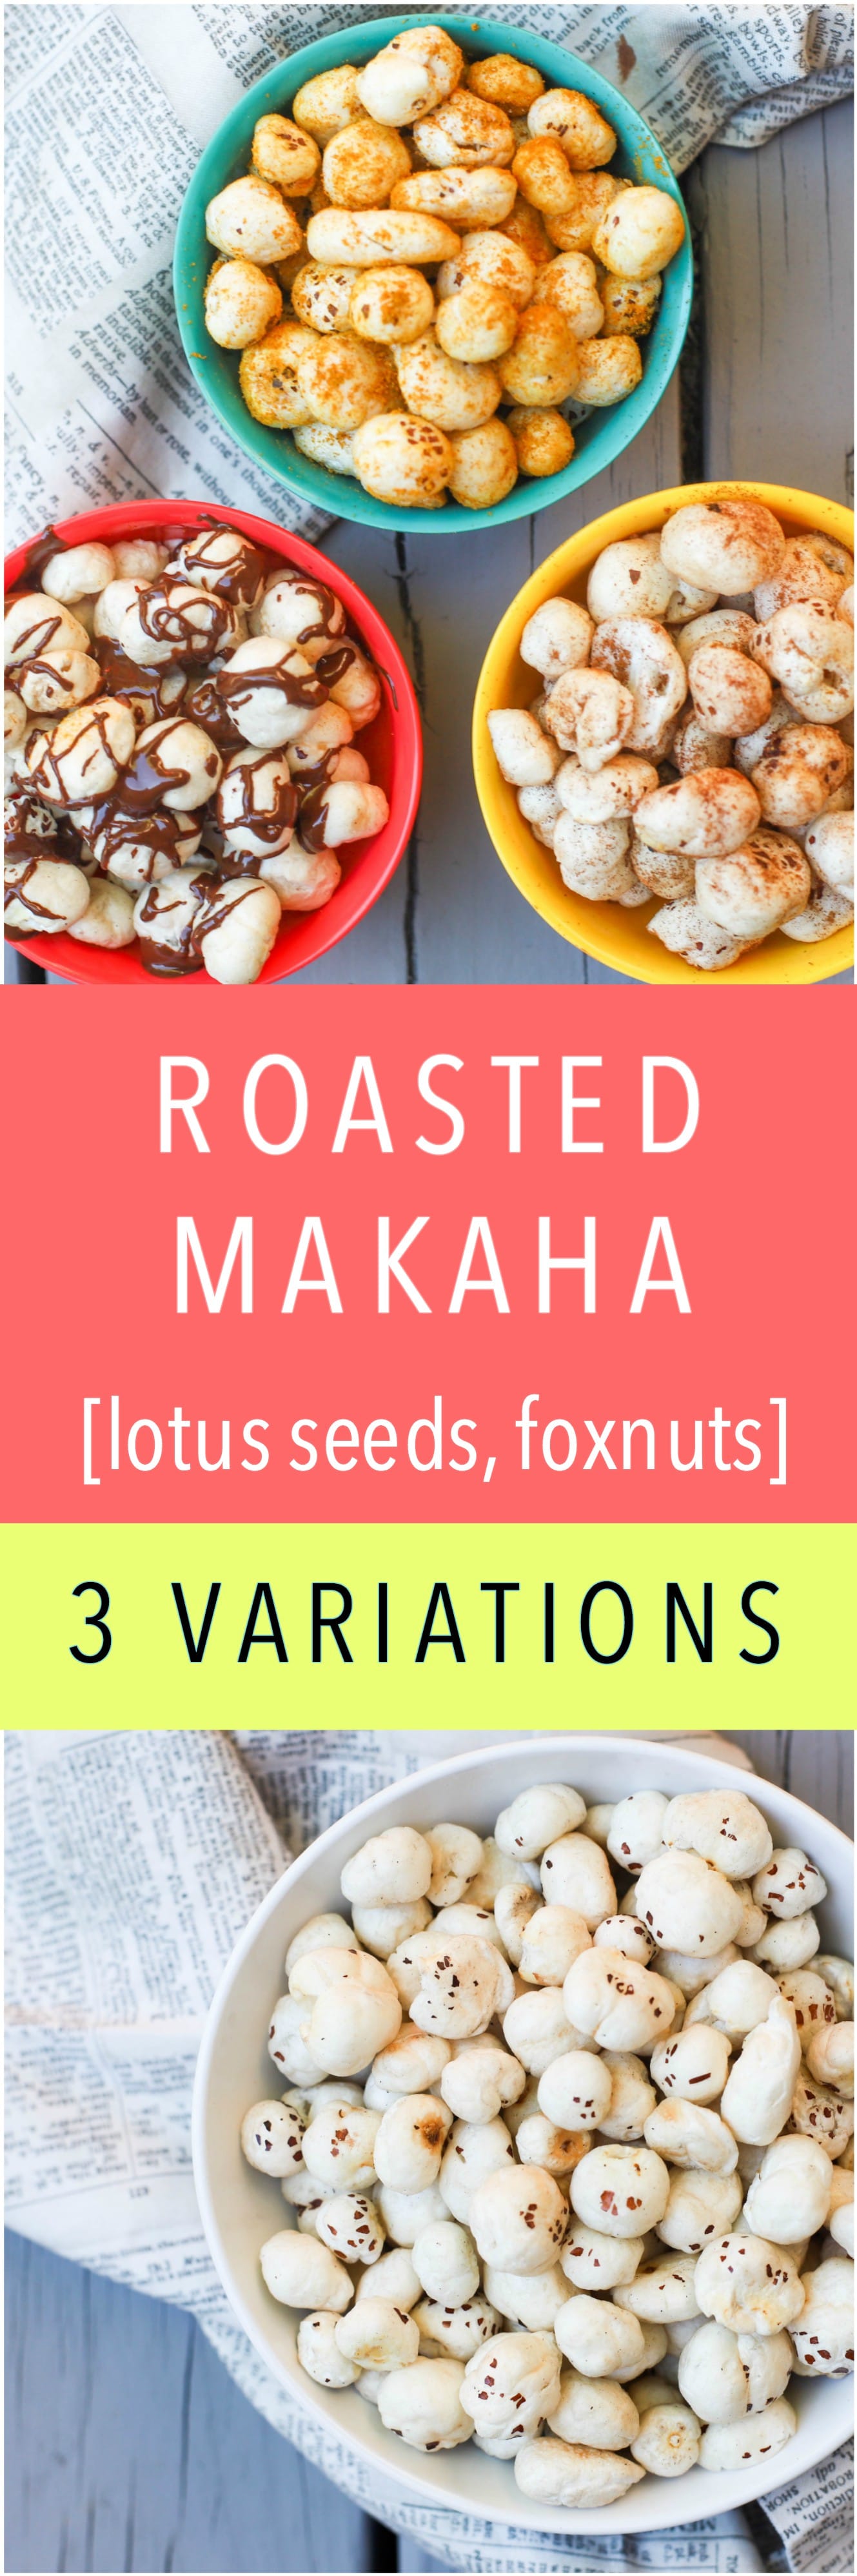 Roasted Makhana [Lotus Seeds, Foxnuts] are nutritious snacks, naturally gluten-free, and can be enjoyed with different seasonings. Made with just 2 ingredients in 10 minutes. 